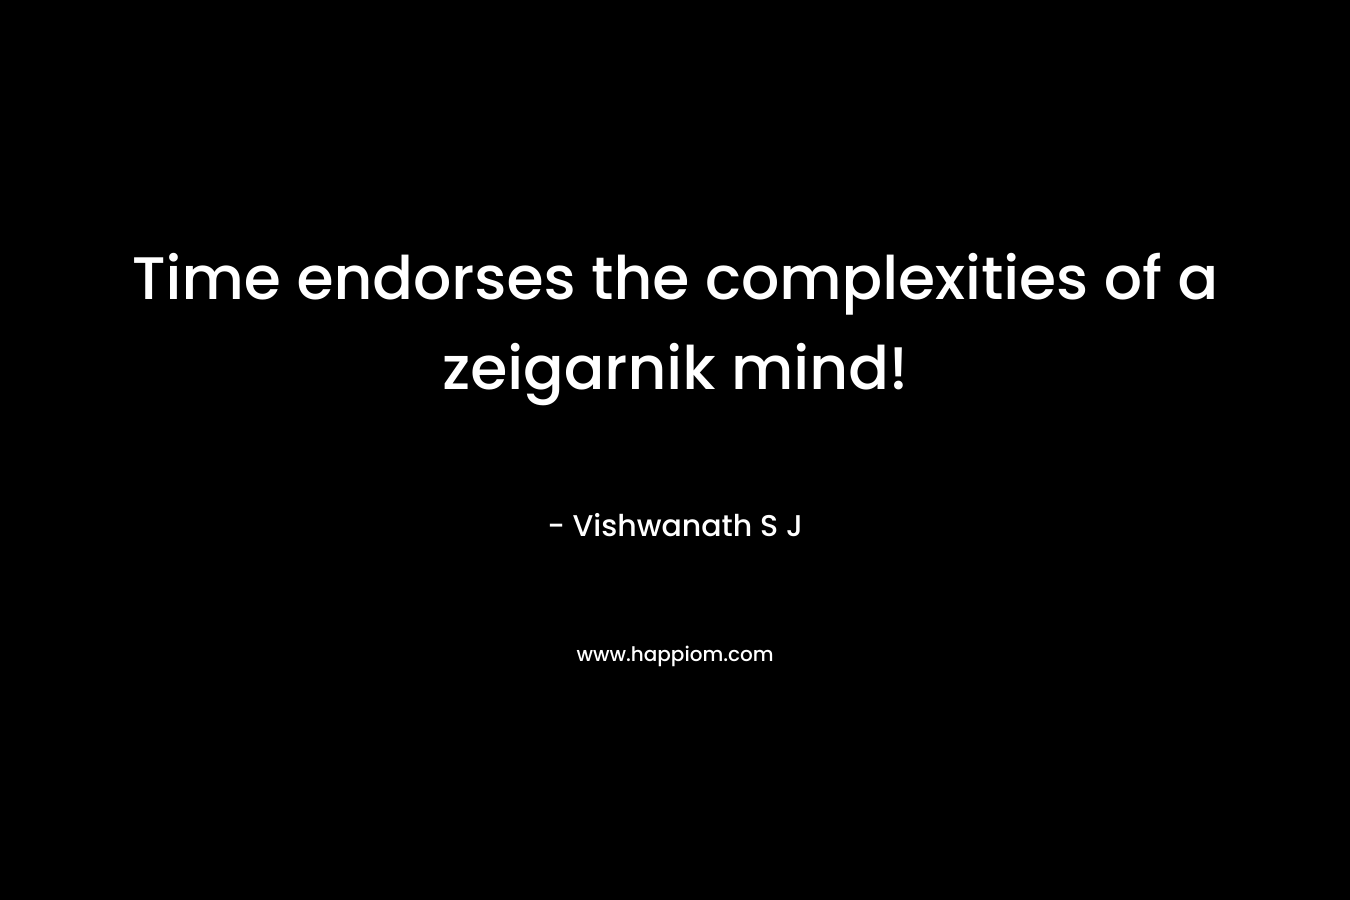 Time endorses the complexities of a zeigarnik mind! – Vishwanath S J